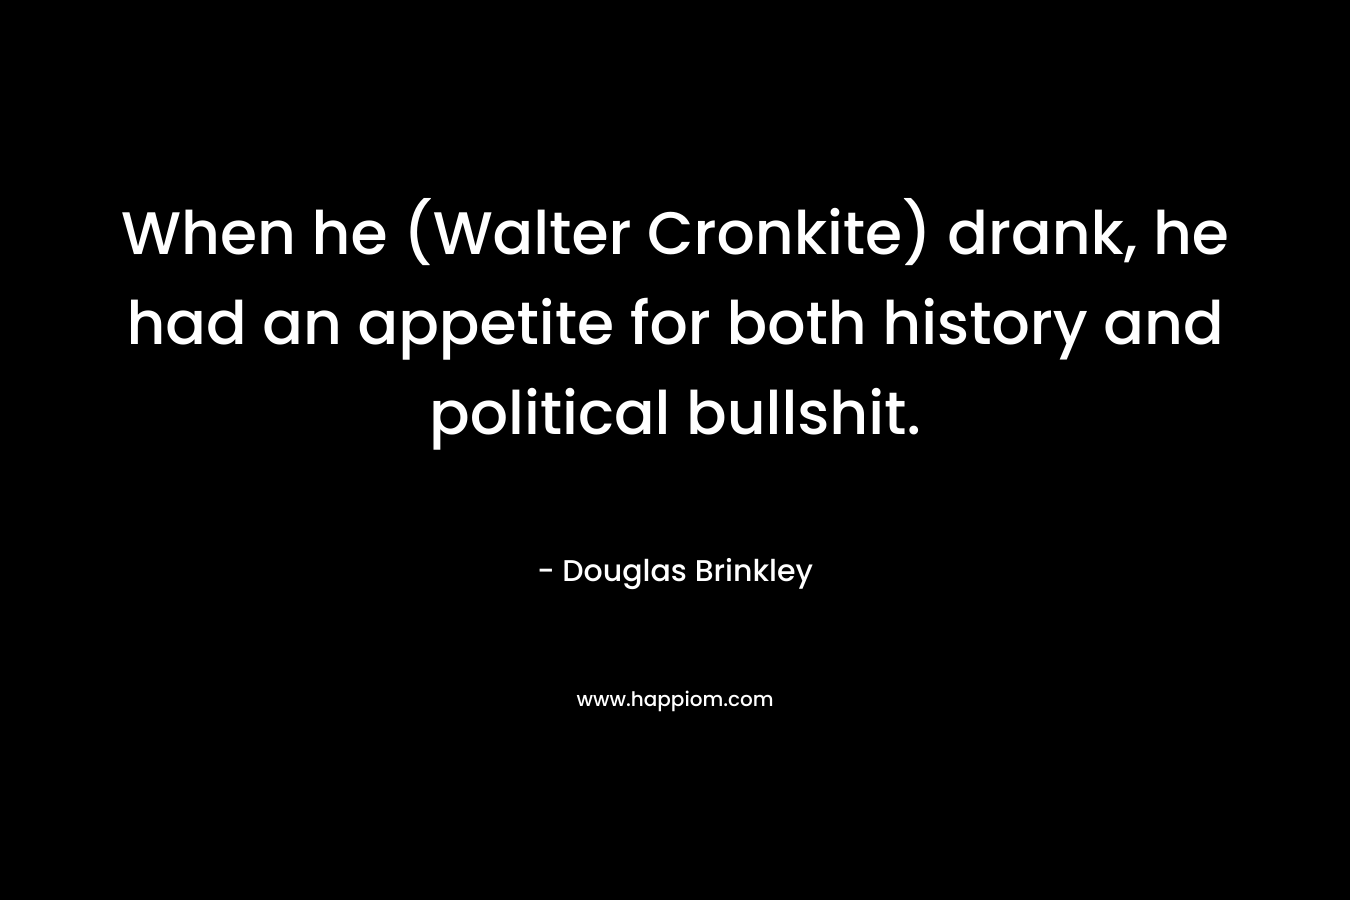 When he (Walter Cronkite) drank, he had an appetite for both history and political bullshit. – Douglas Brinkley